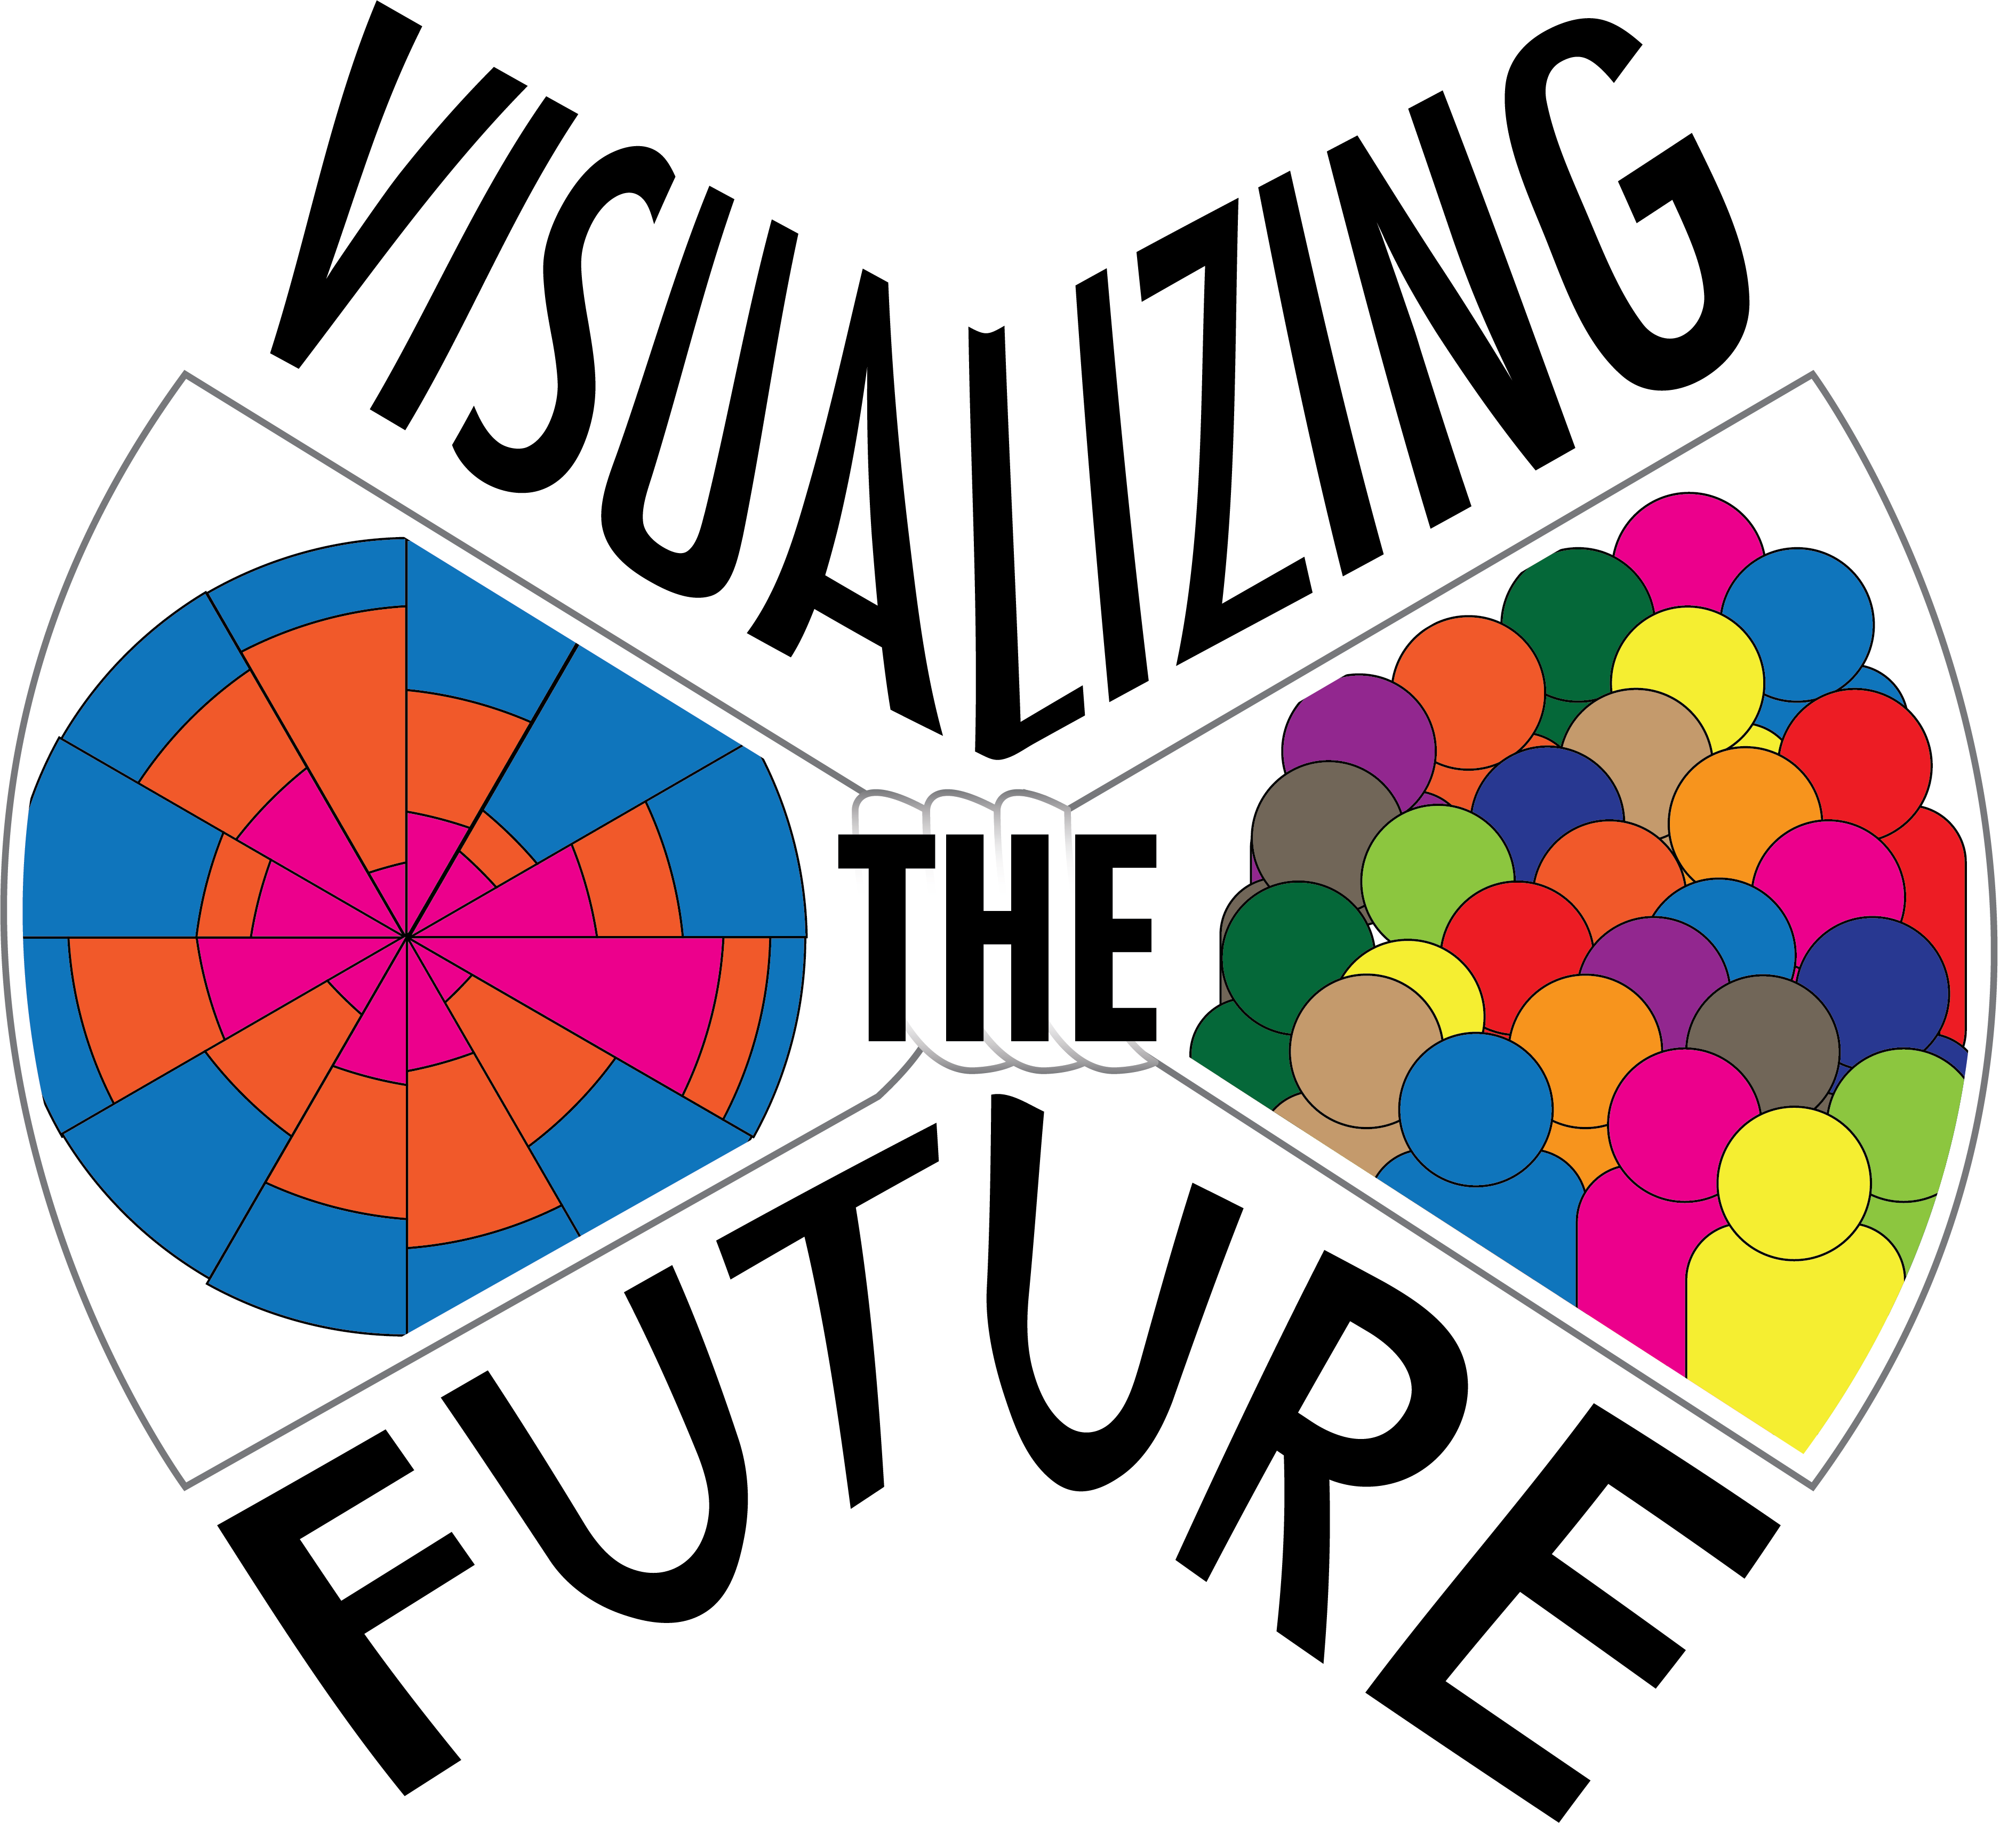 Visualizing the Future logo, with a rose chart on the left and a colorful group of people on the right.